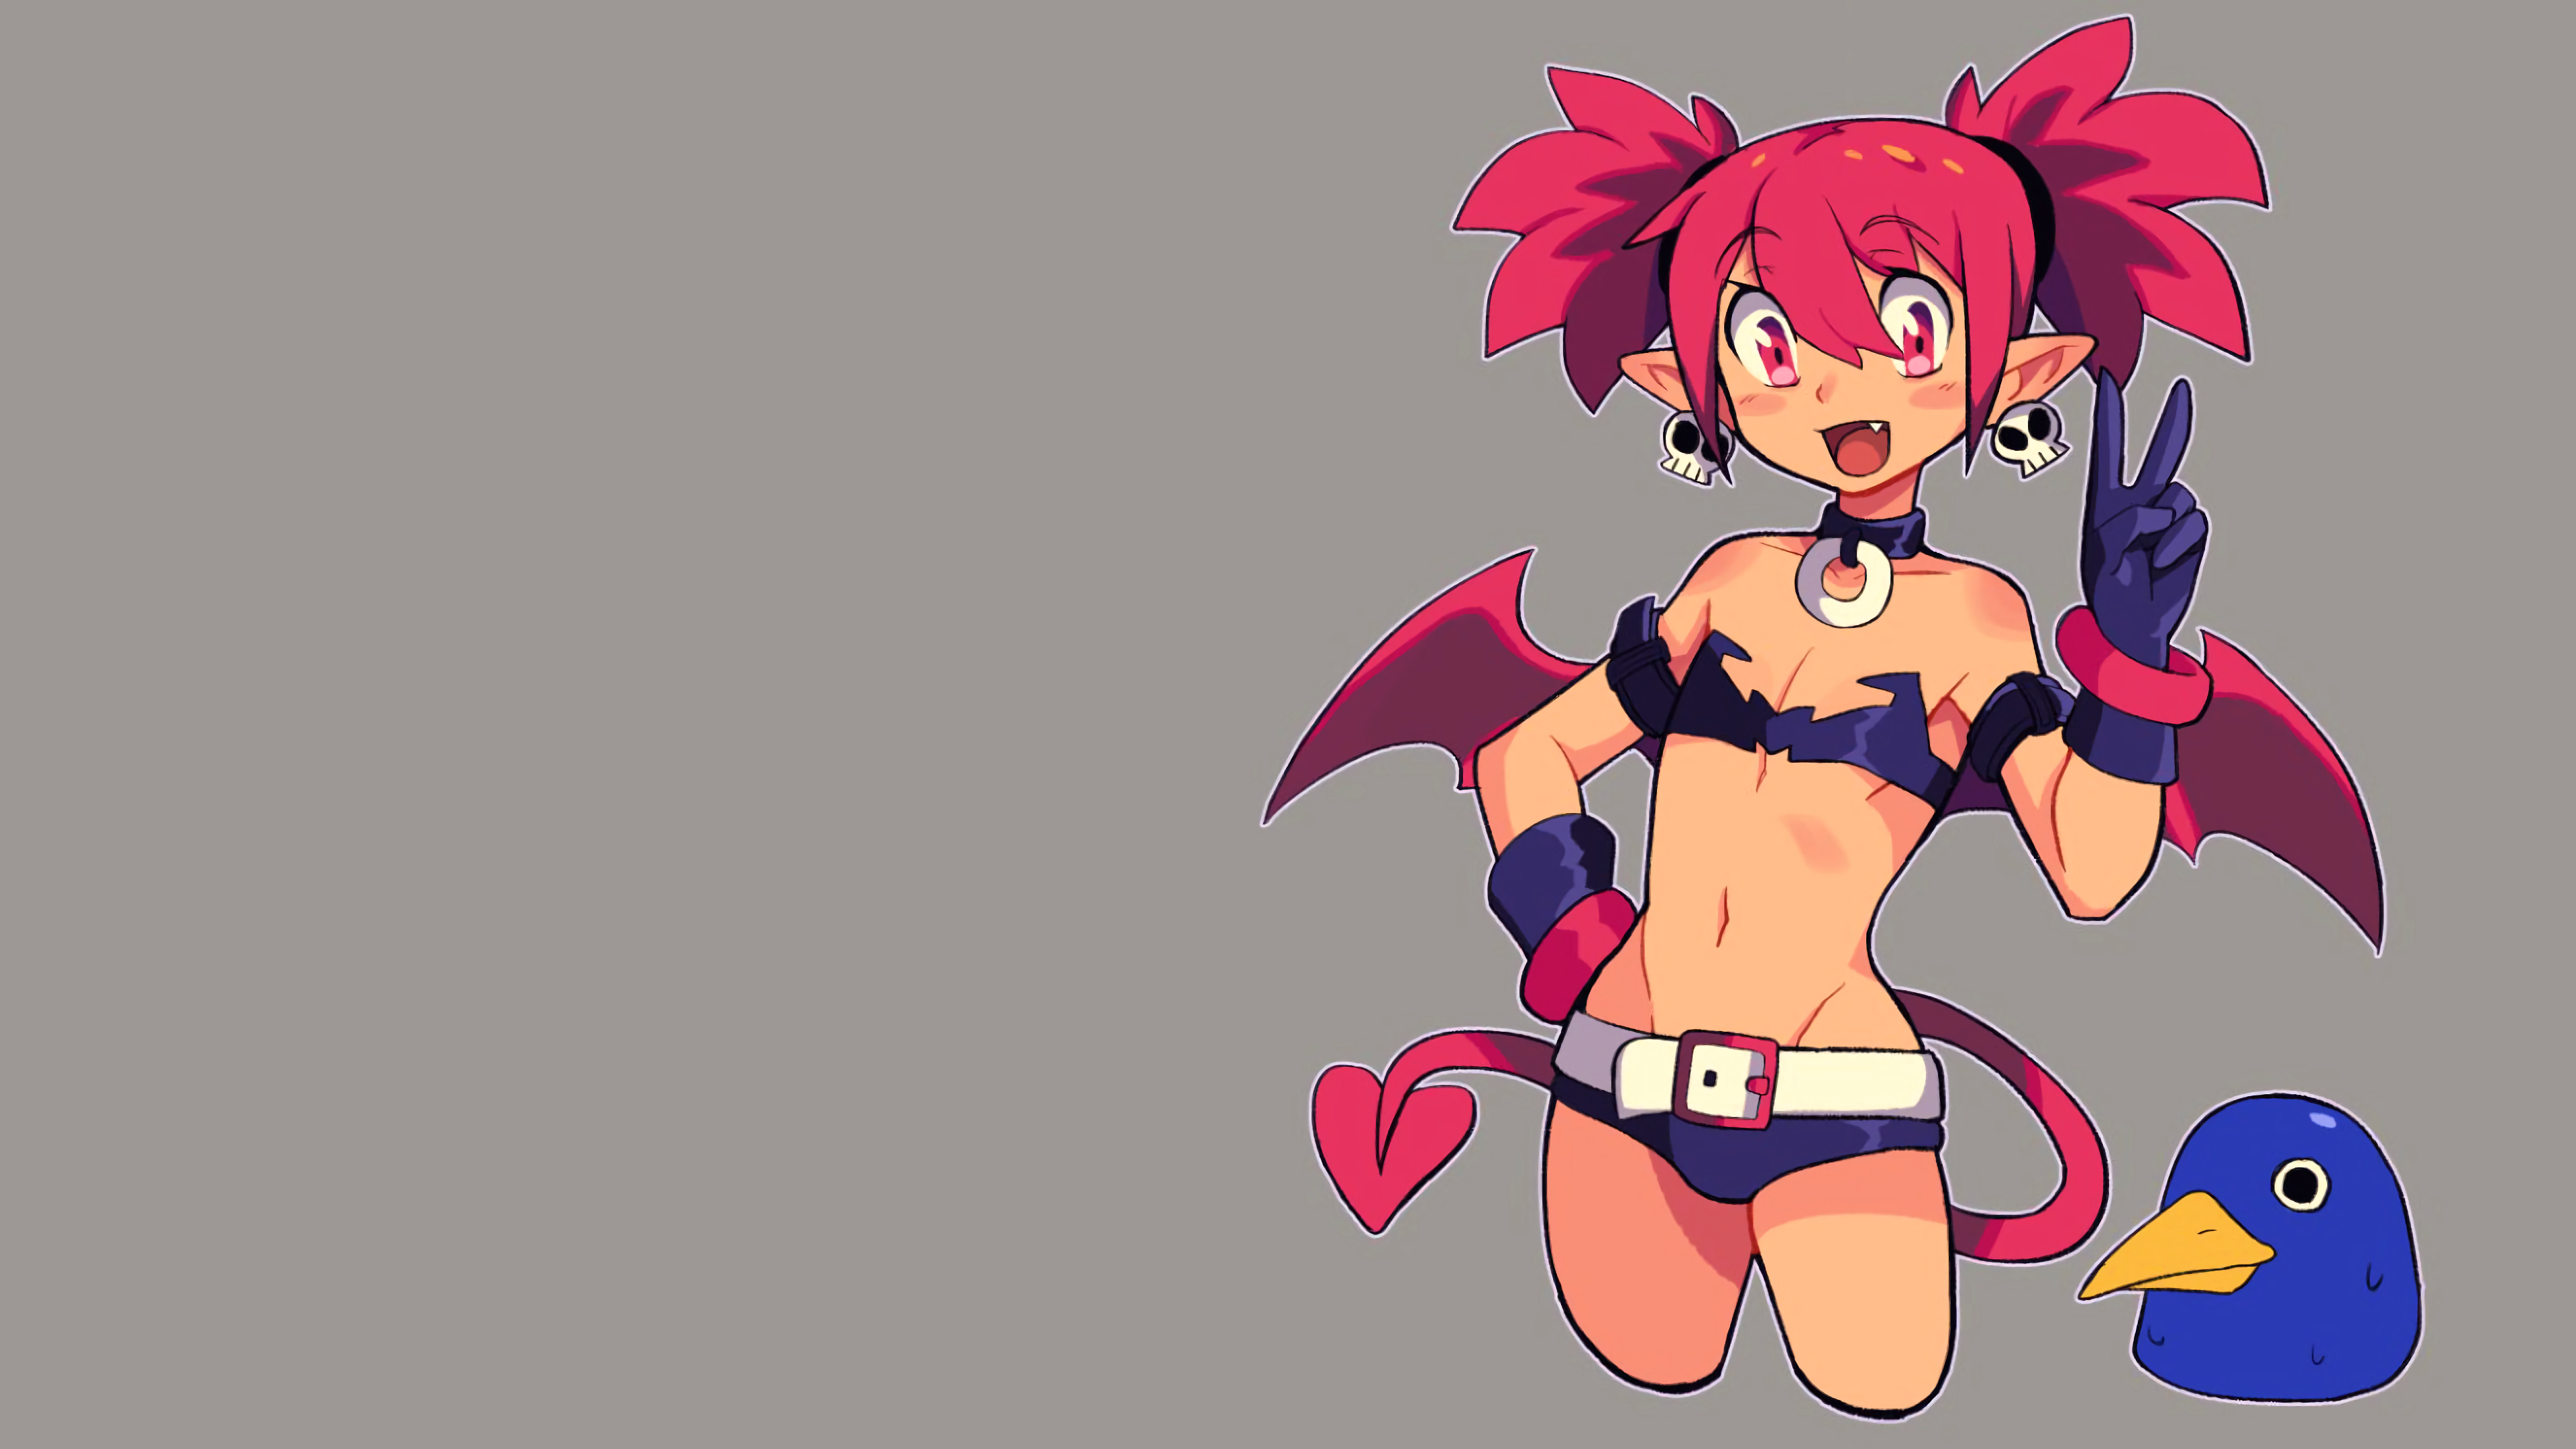 Anime 3840x2160 video games video game girls redhead Disgaea Etna red eyes twintails crop top short shorts belly belly button tail demon tail demon girls earring gloves black gloves thighs devil wings choker belt skull looking at viewer smiling peace sign open mouth simple background blushing penguins skimpy clothes